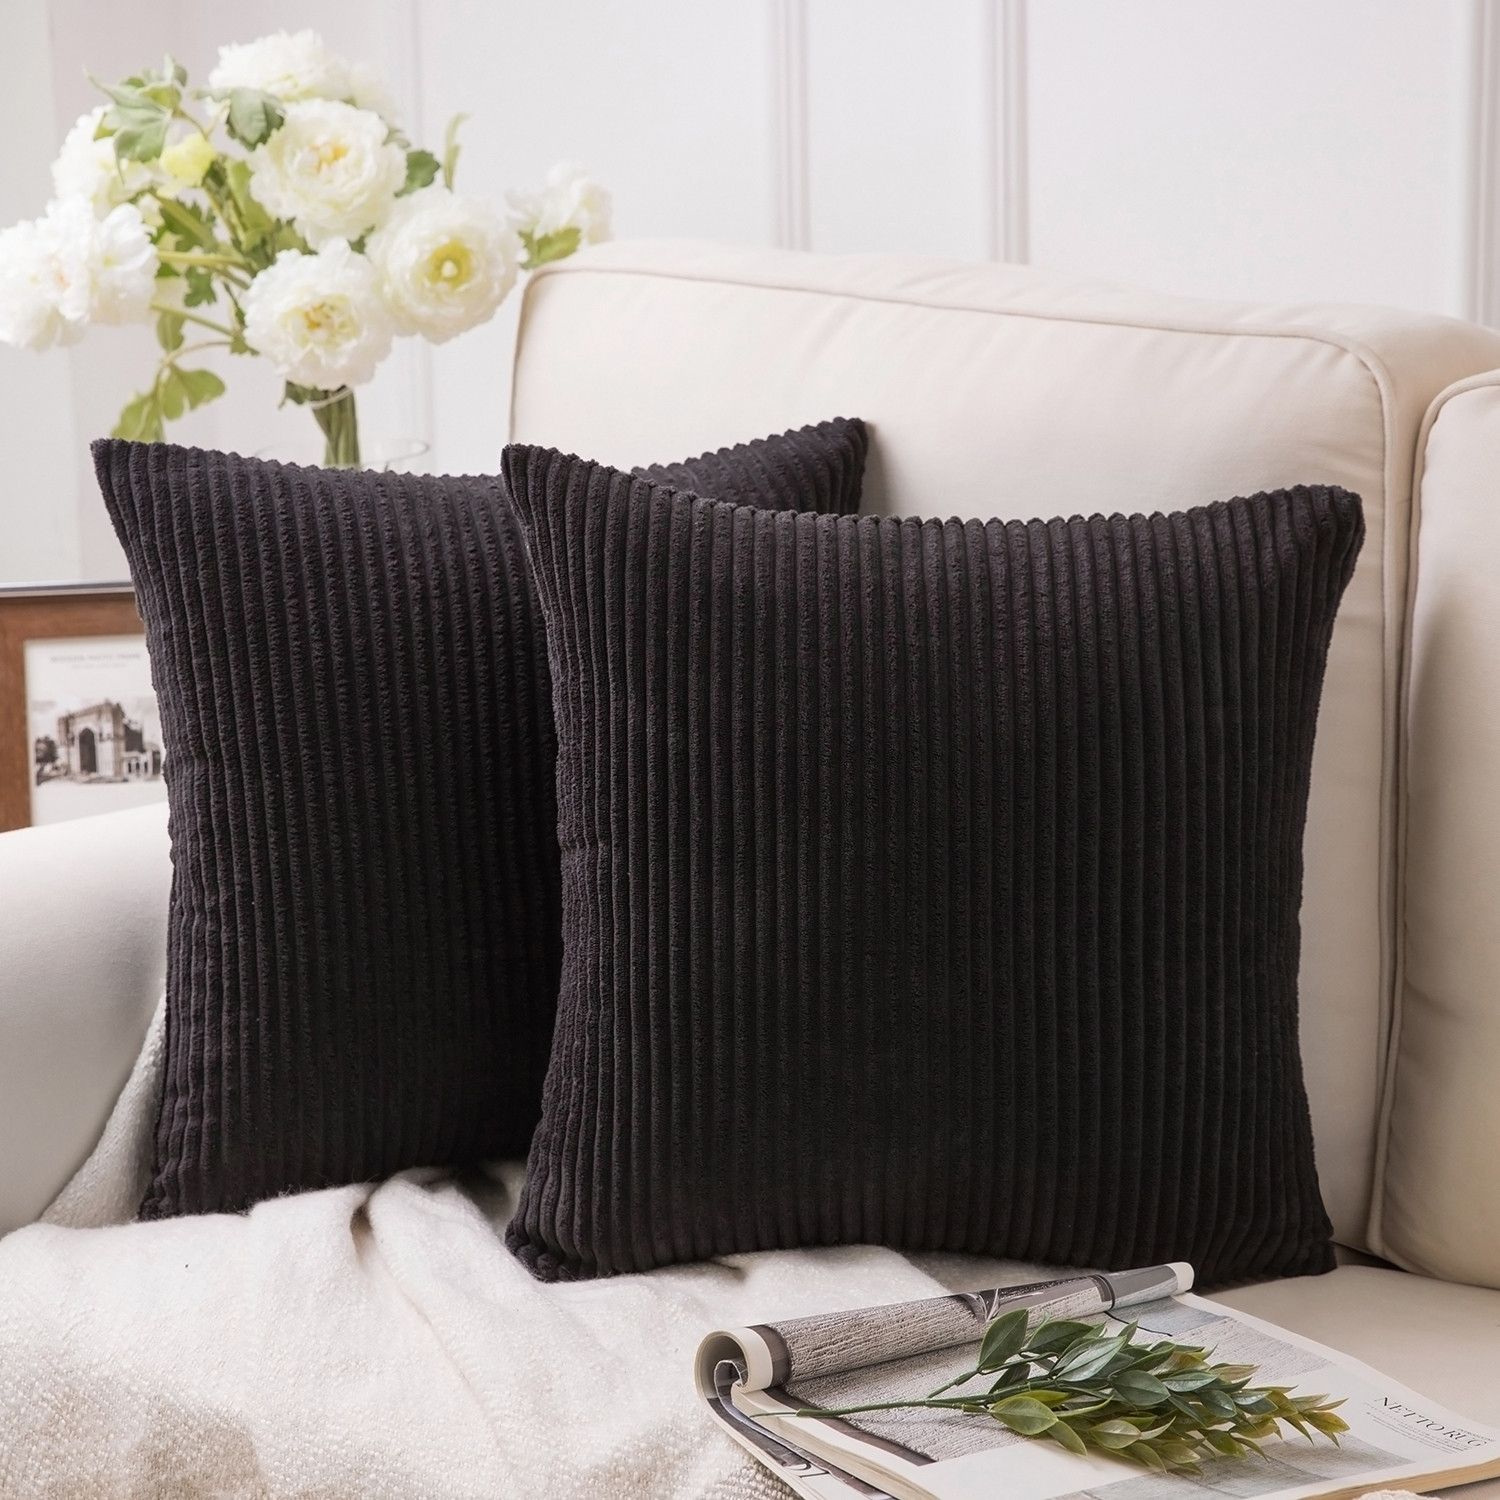 Soft Corduroy Striped Velvet Square Decorative Throw Pillow Cusion For Couch, 20" x 20", Black, 2... | Walmart (US)